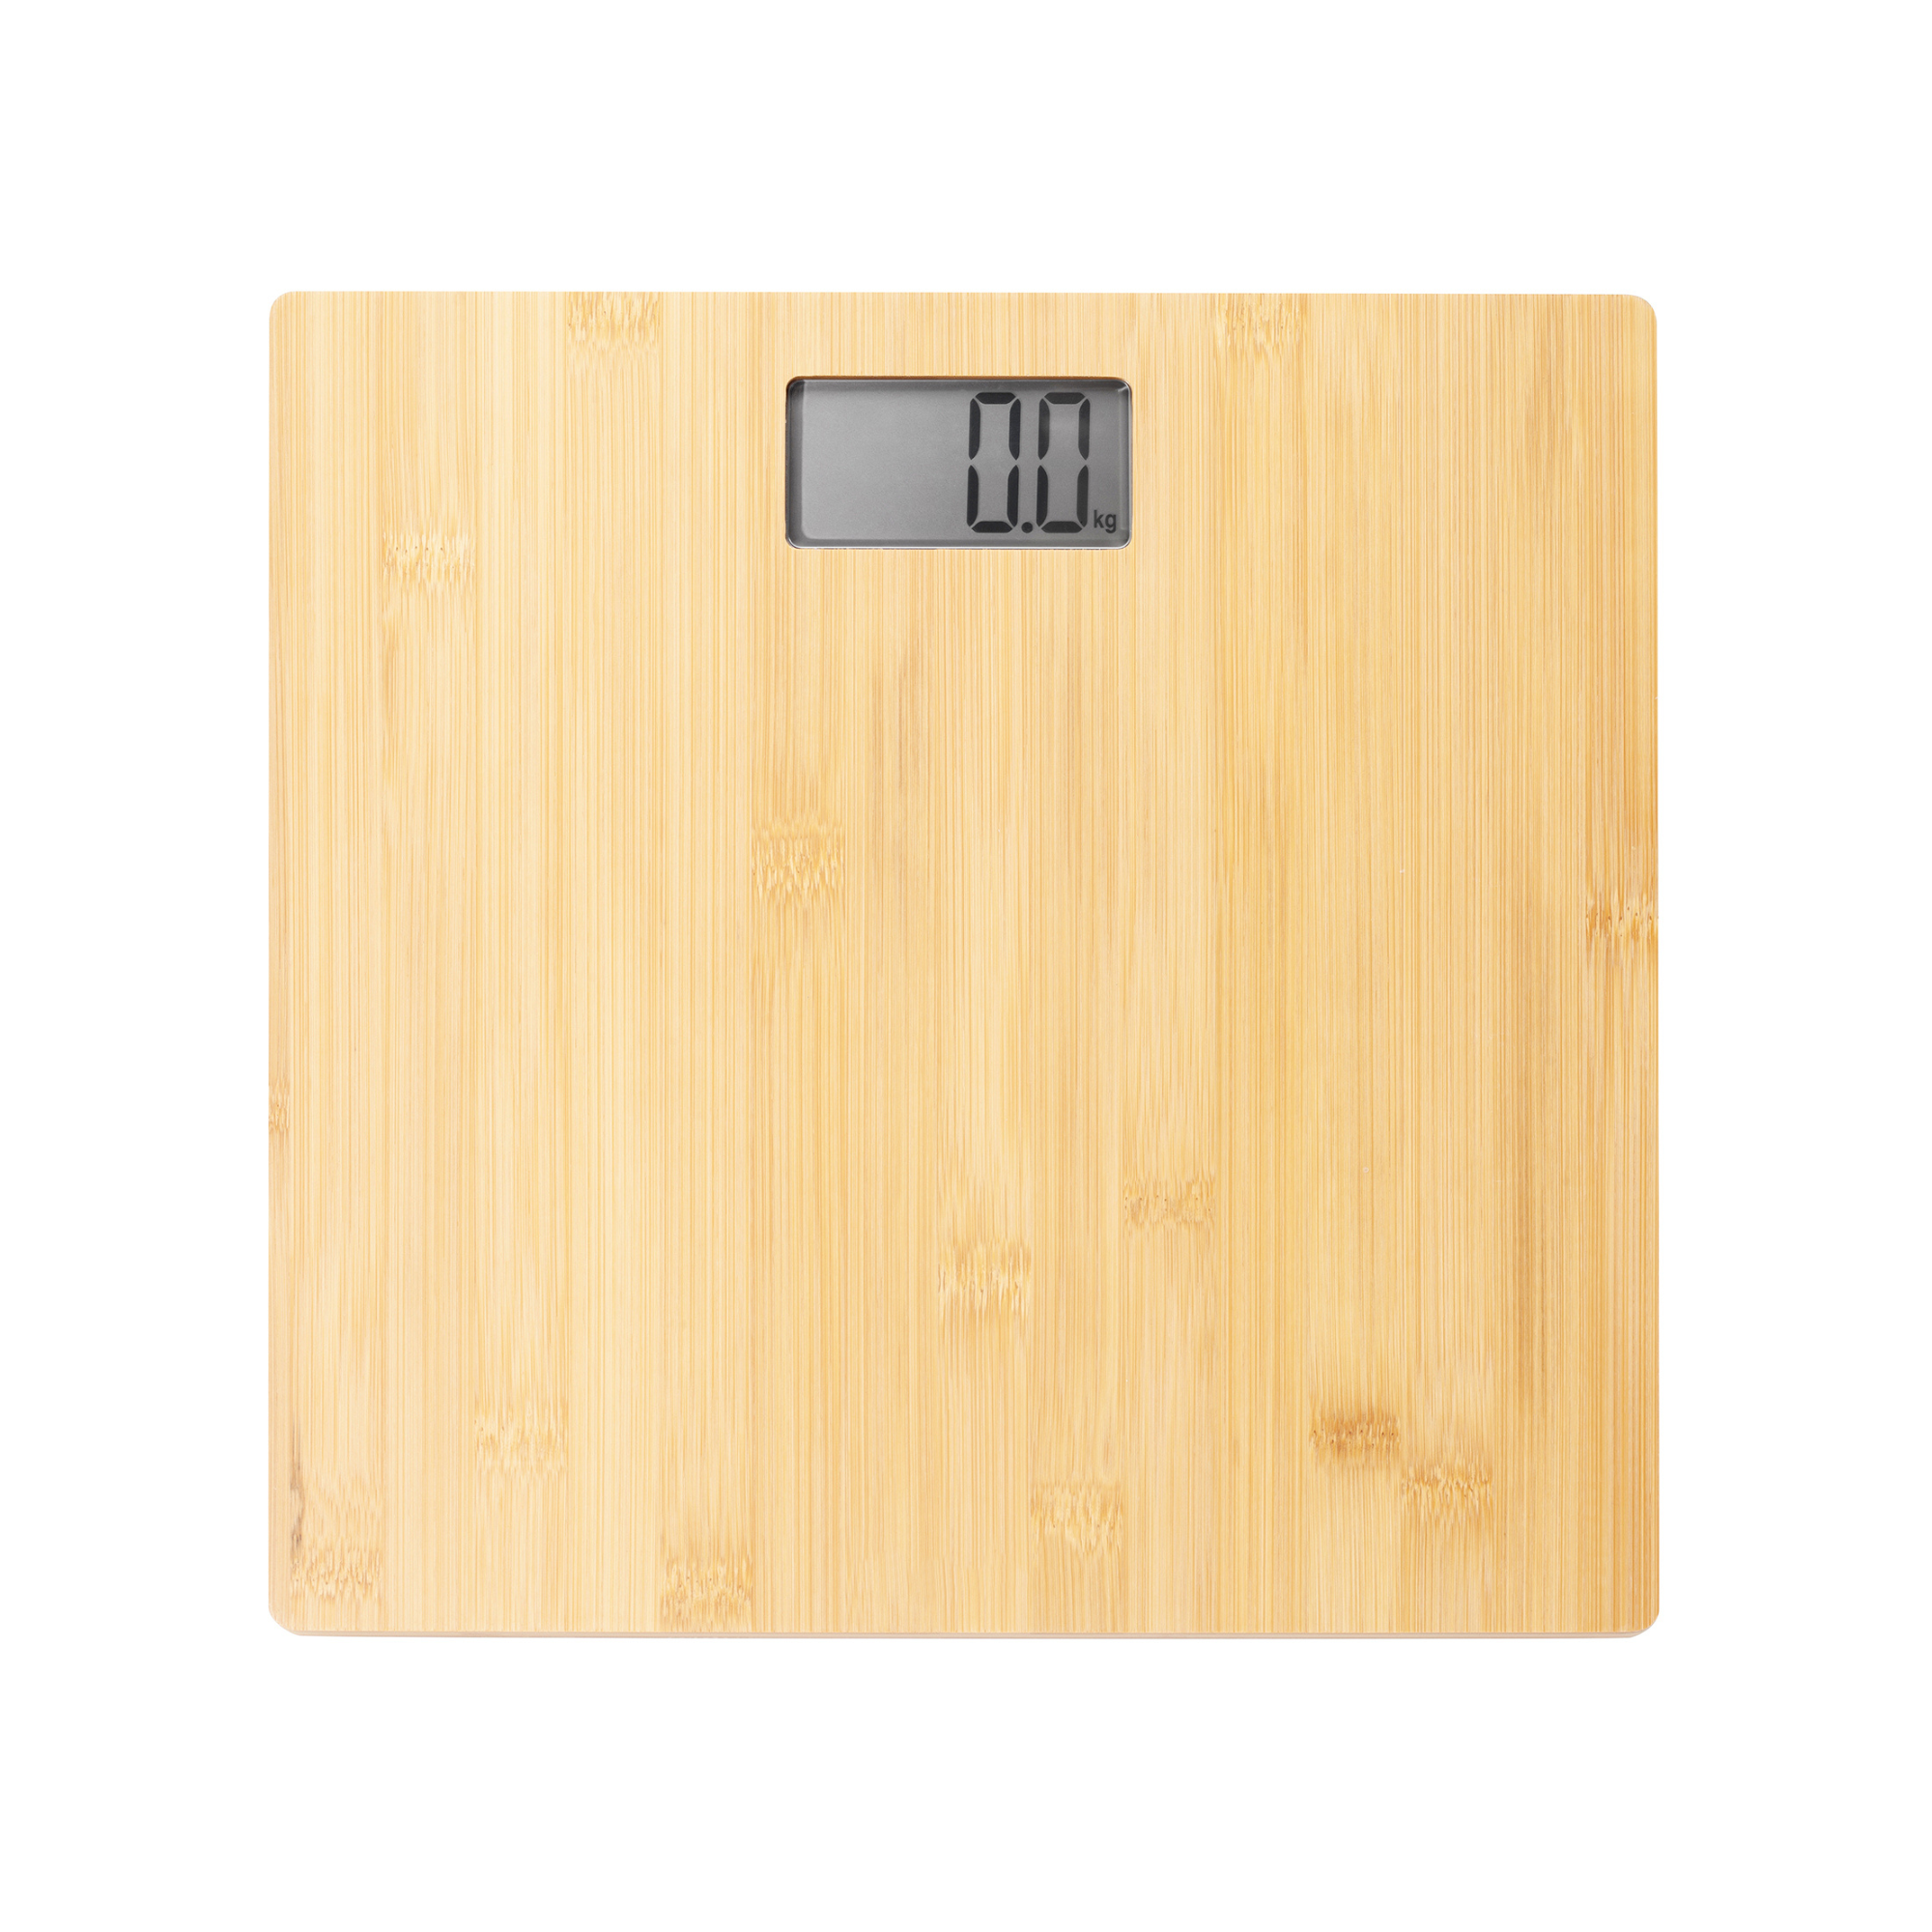 Digital Bathroom Scale for Body Weight, Auto Step-On Design, Ultra Thin, Bamboo by Prominence Home